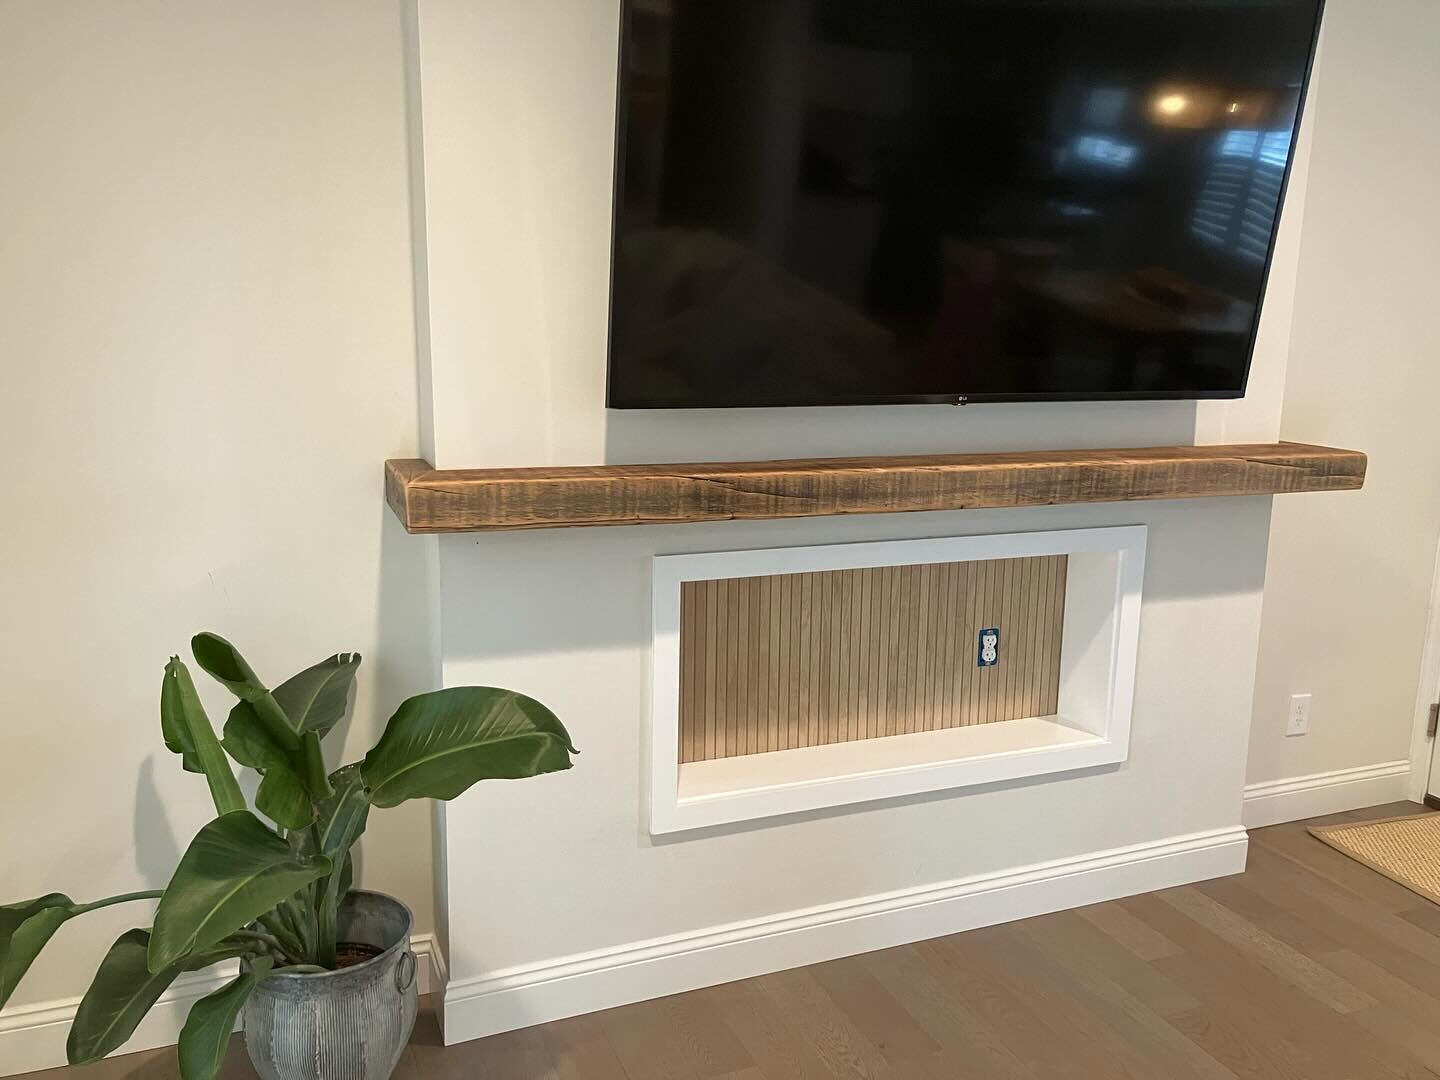 Wrap around mantle and a nook where there was an electric fireplace&hellip; for a long time and loyal customer!

Garden State Surf and Art
8101 Long Beach Boulevard
Long Beach Township, NJ 08008

DM: @gardenstatesurf 
Email: gardenstatesurf@gmail.com